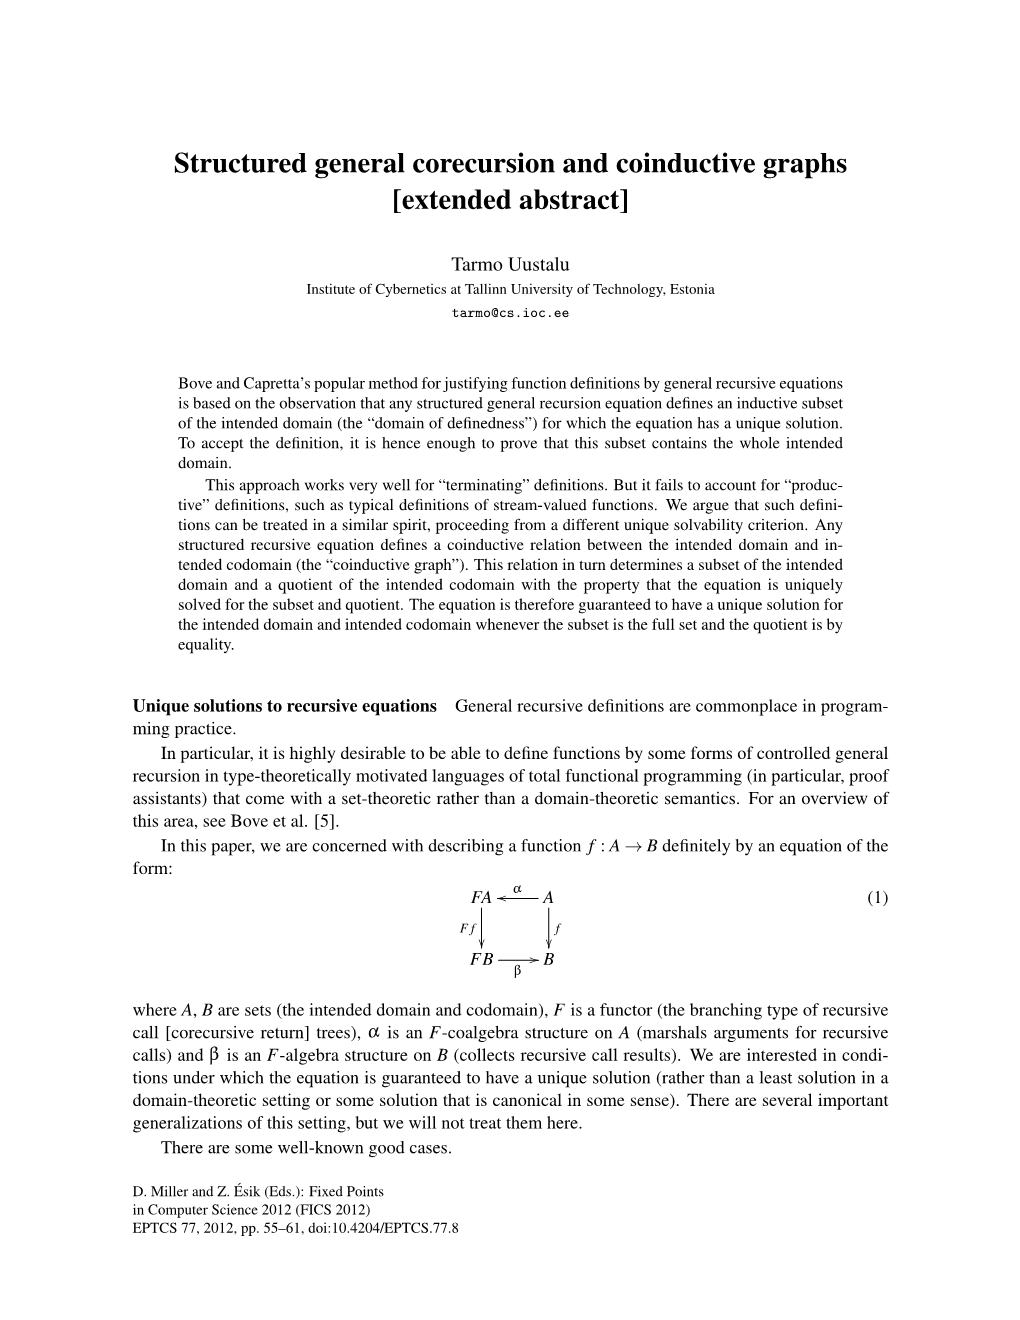 Structured General Corecursion and Coinductive Graphs [Extended Abstract]